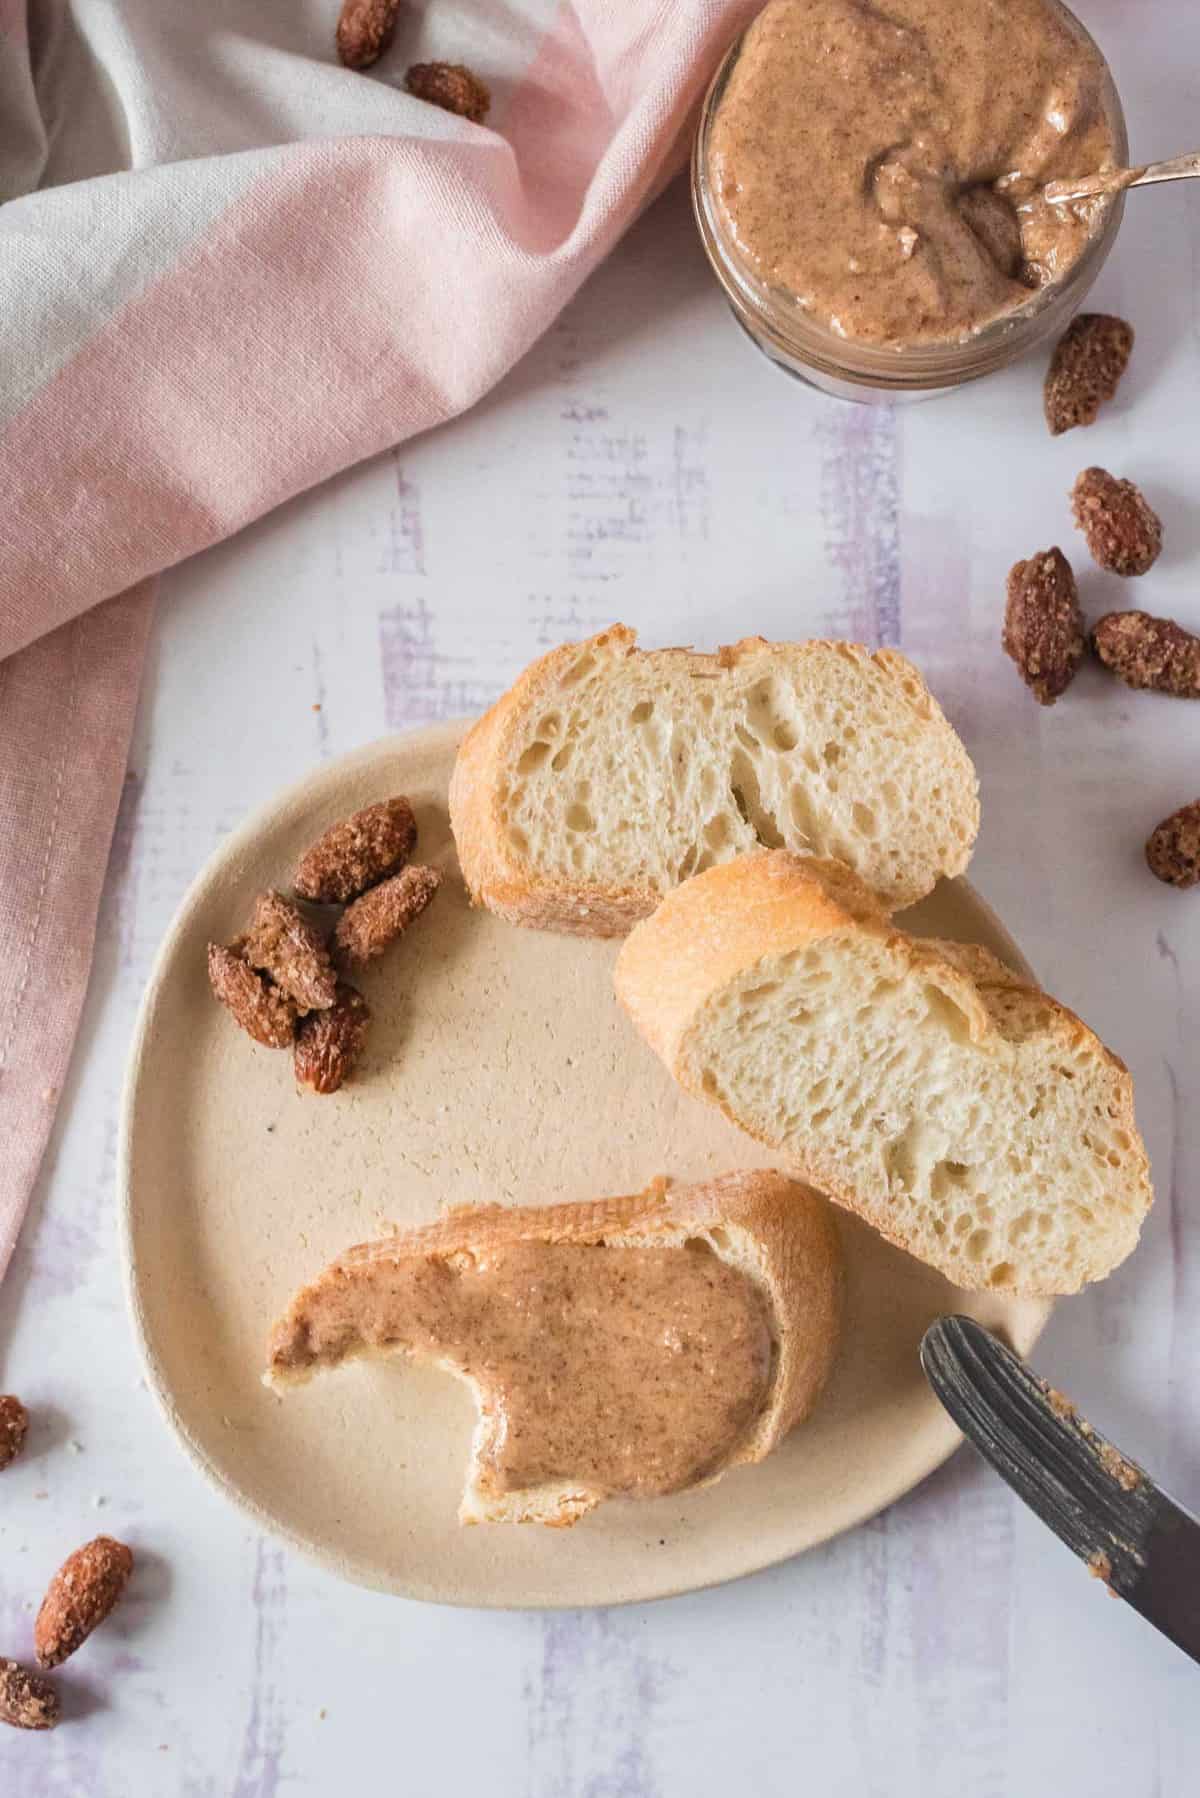 Almond butter spread on bread with more bread and a jar of almond butter nearby.